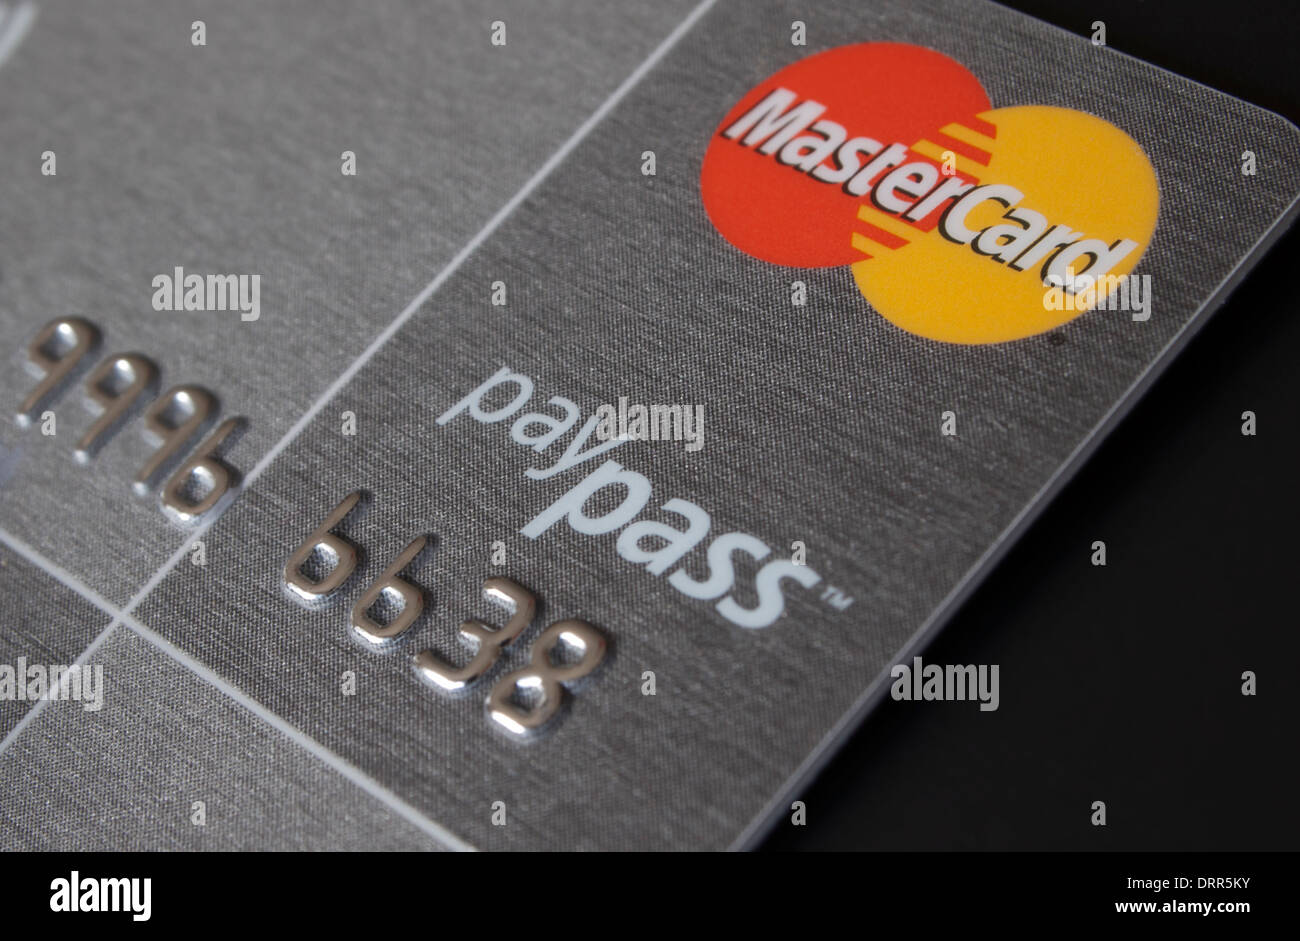 Credit Card enabed for PayPass contactless payment system. Stock Photo